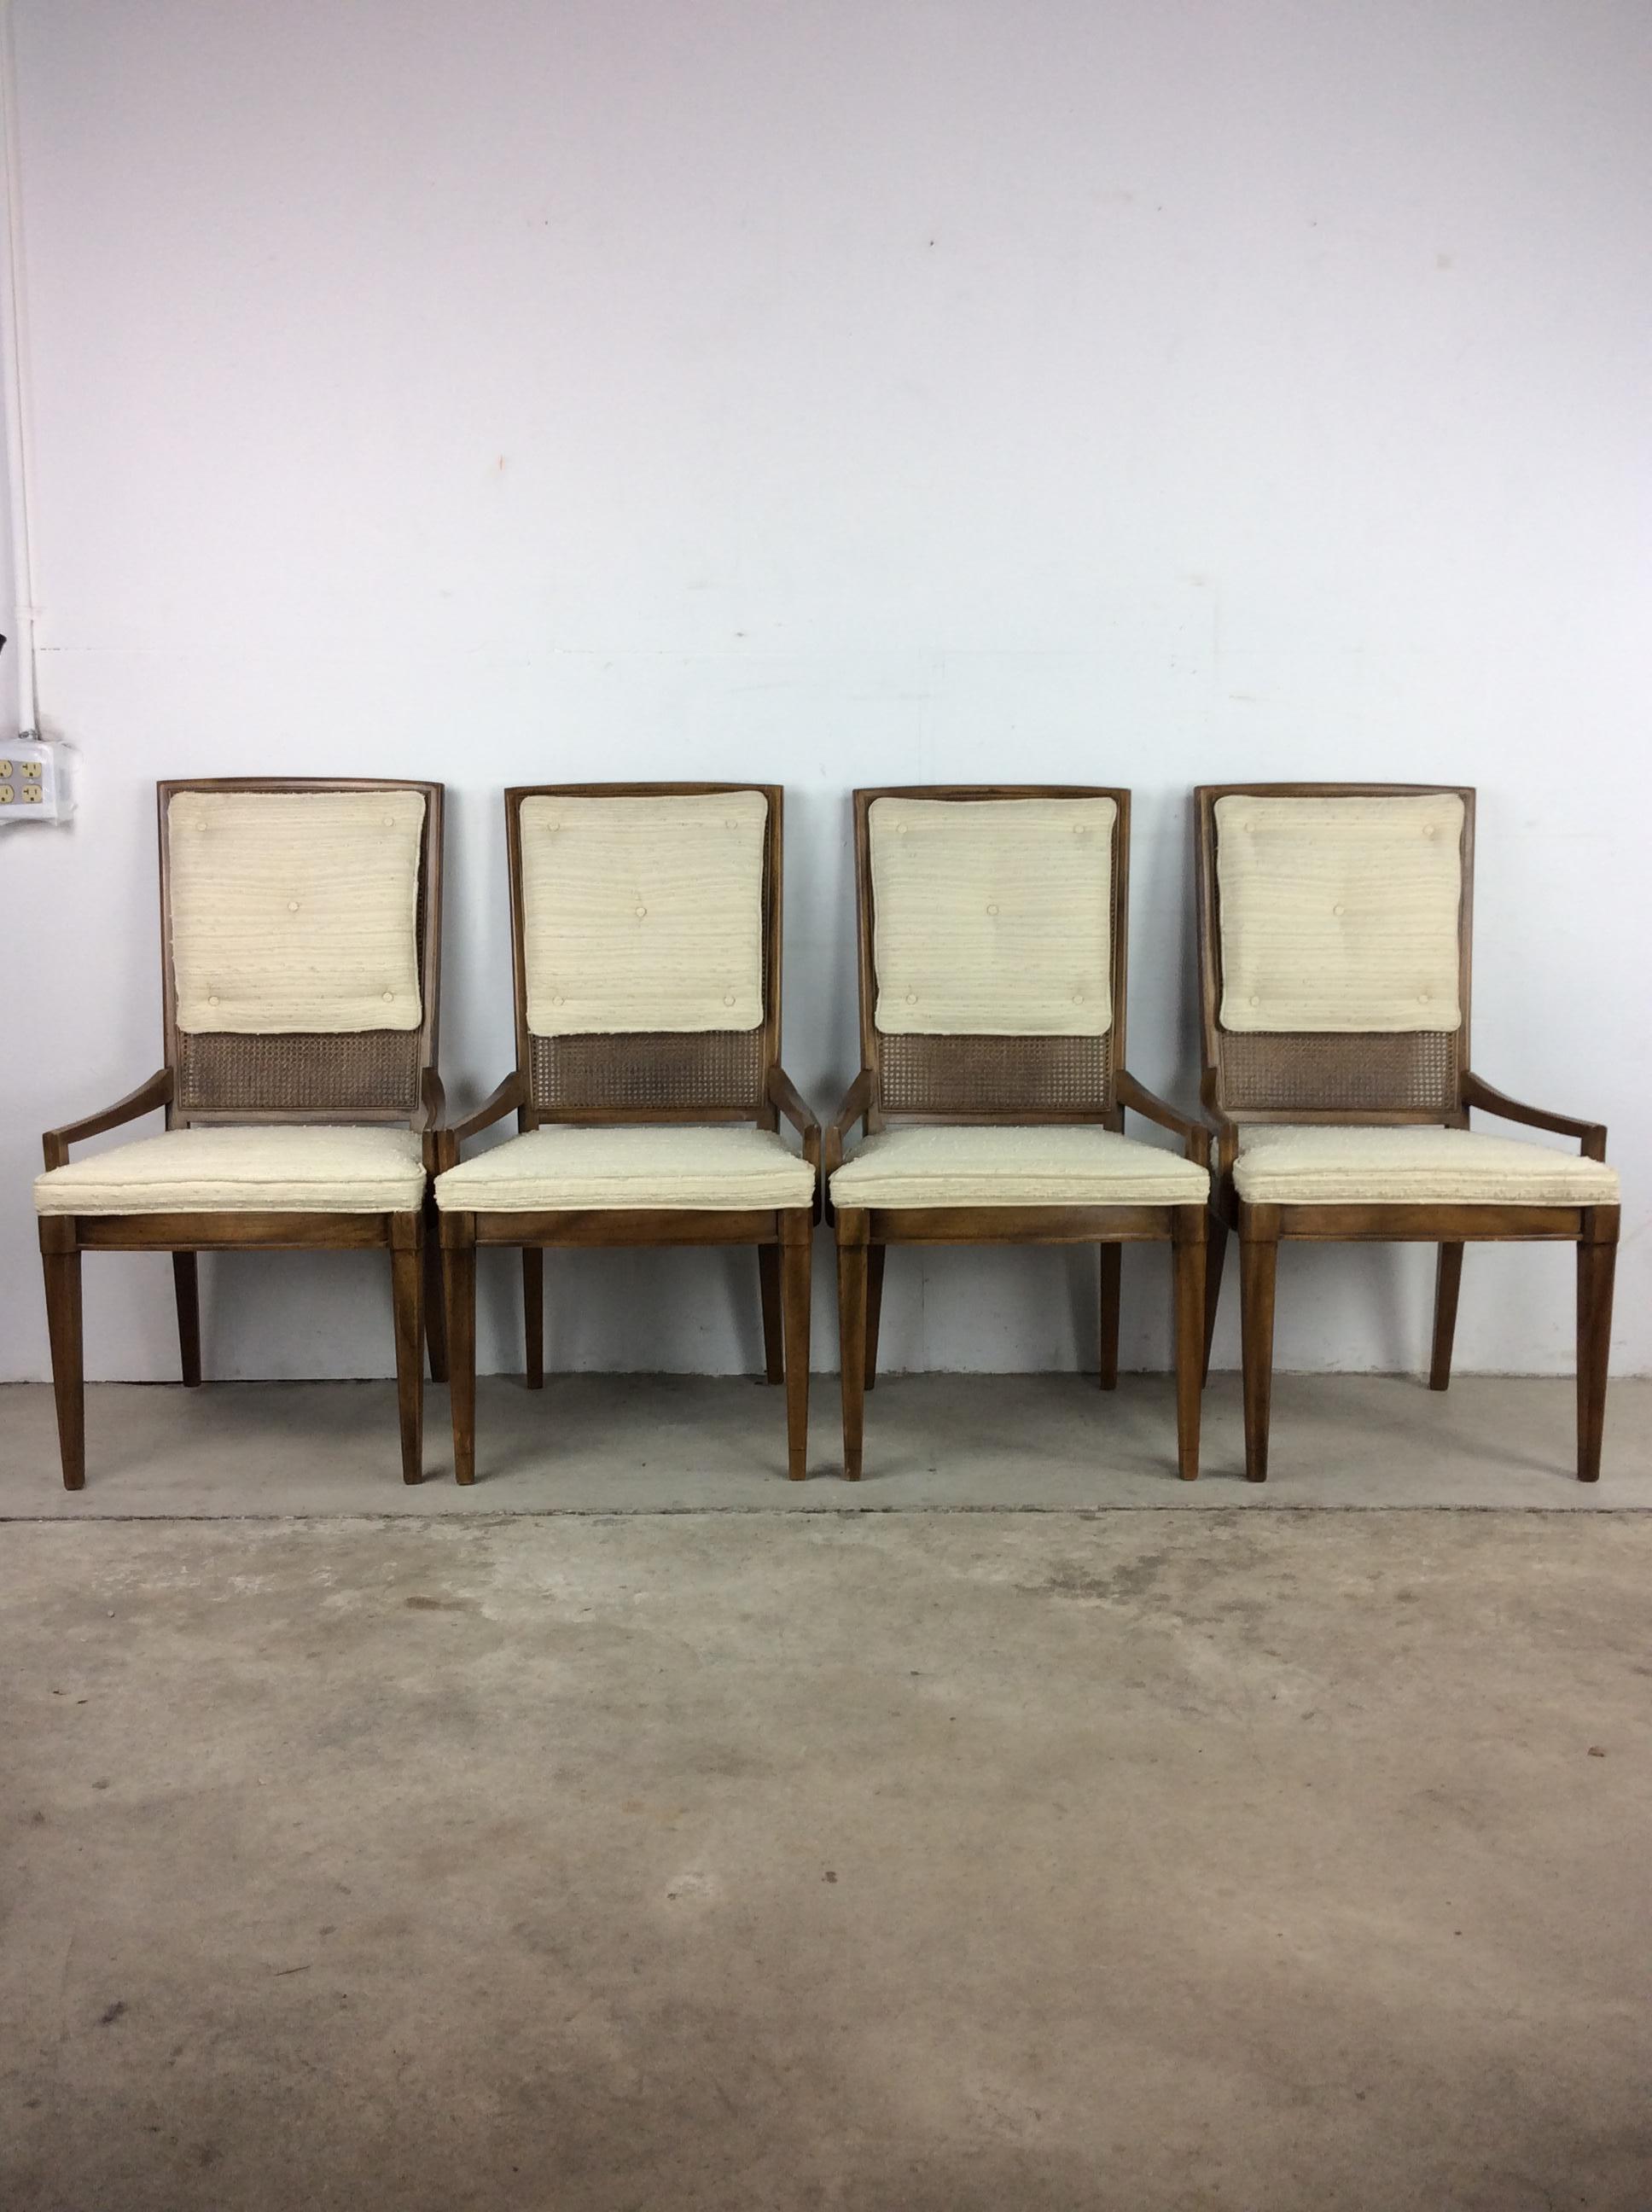 This Mid-Century Modern set of four dining chairs features hardwood construction, unique low arms, vintage white upholstery on seats and back, caning under back cushions, and tall tapered legs.
Dimensions: 21 W 19 D 39.5 H 18 SH 20a H.
 